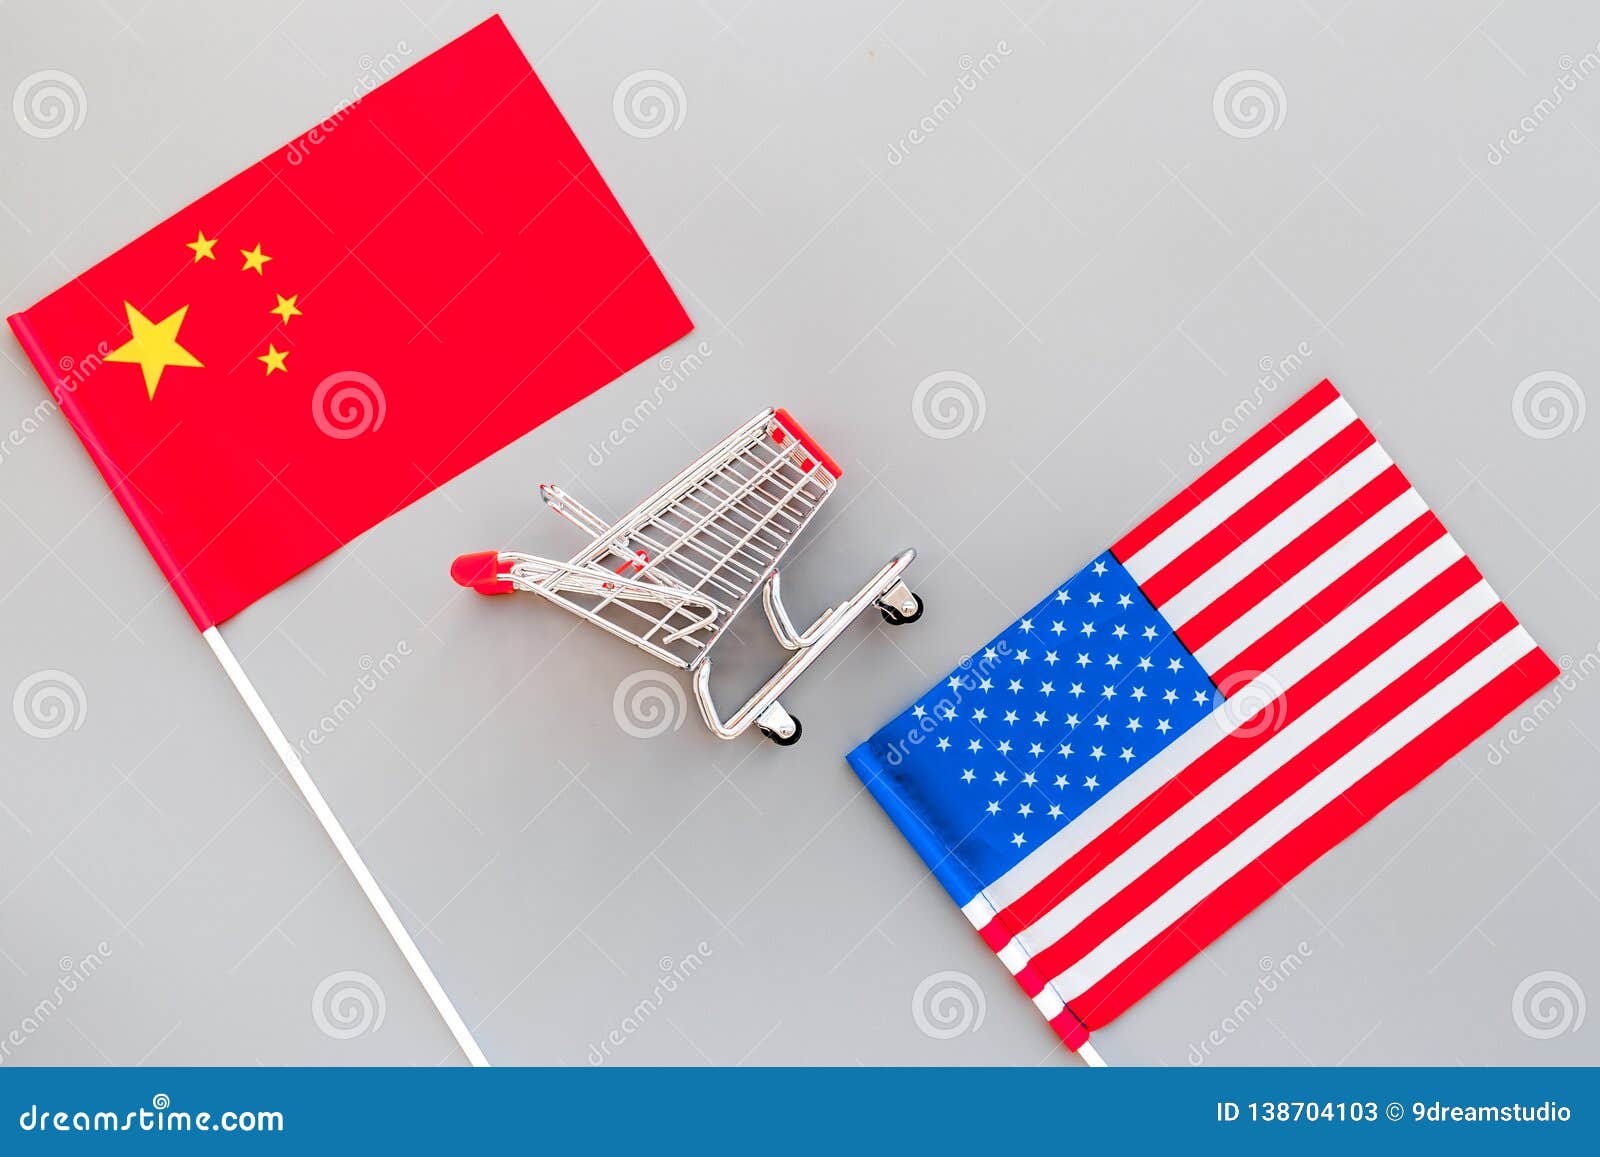 USA And China Trade War. American And Chinese Flags Near ...